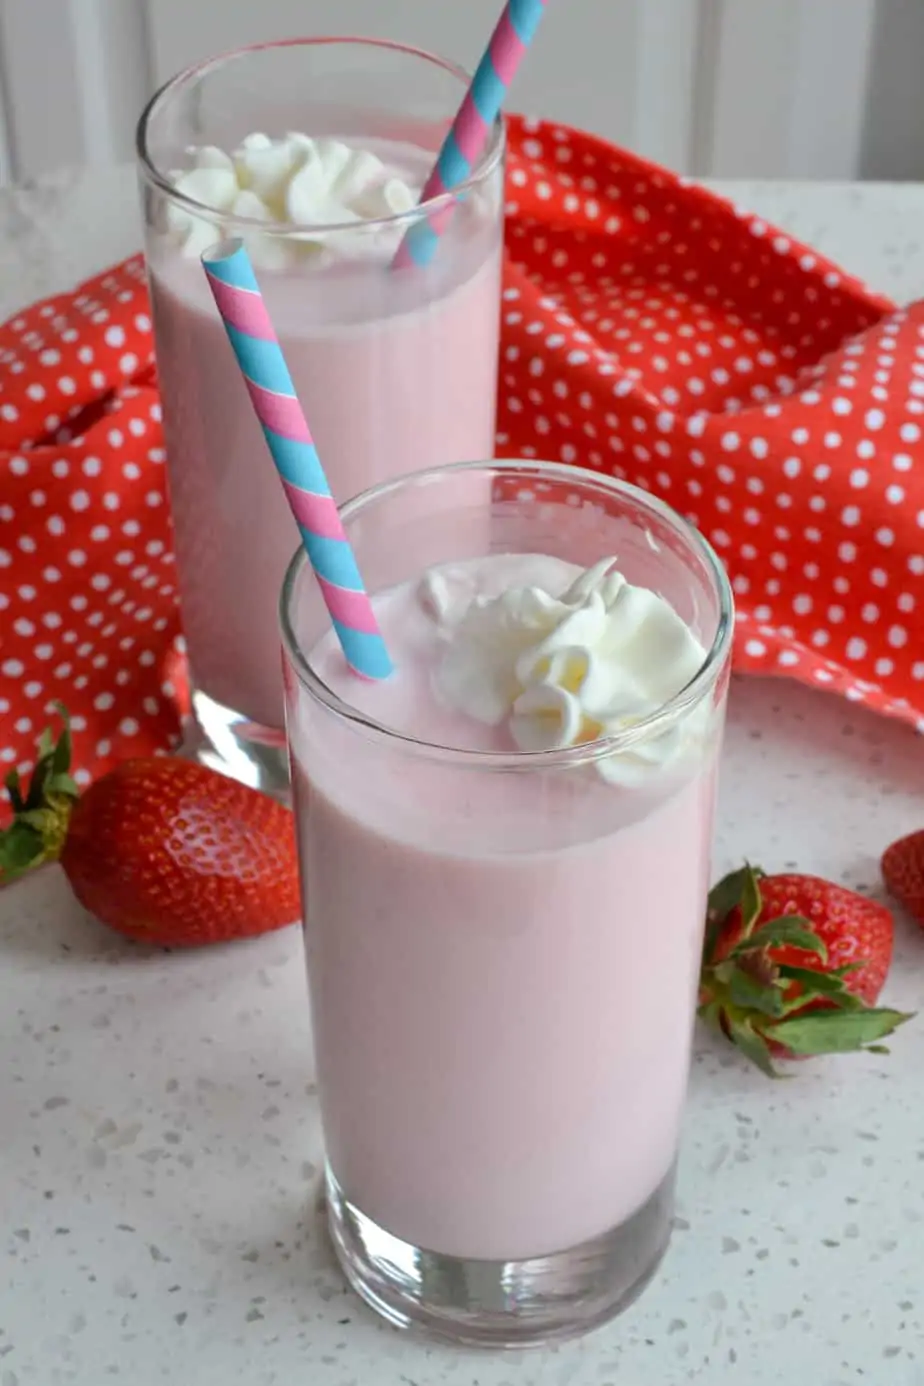 Creamy cows milk combined with sweet strawberry syrup.